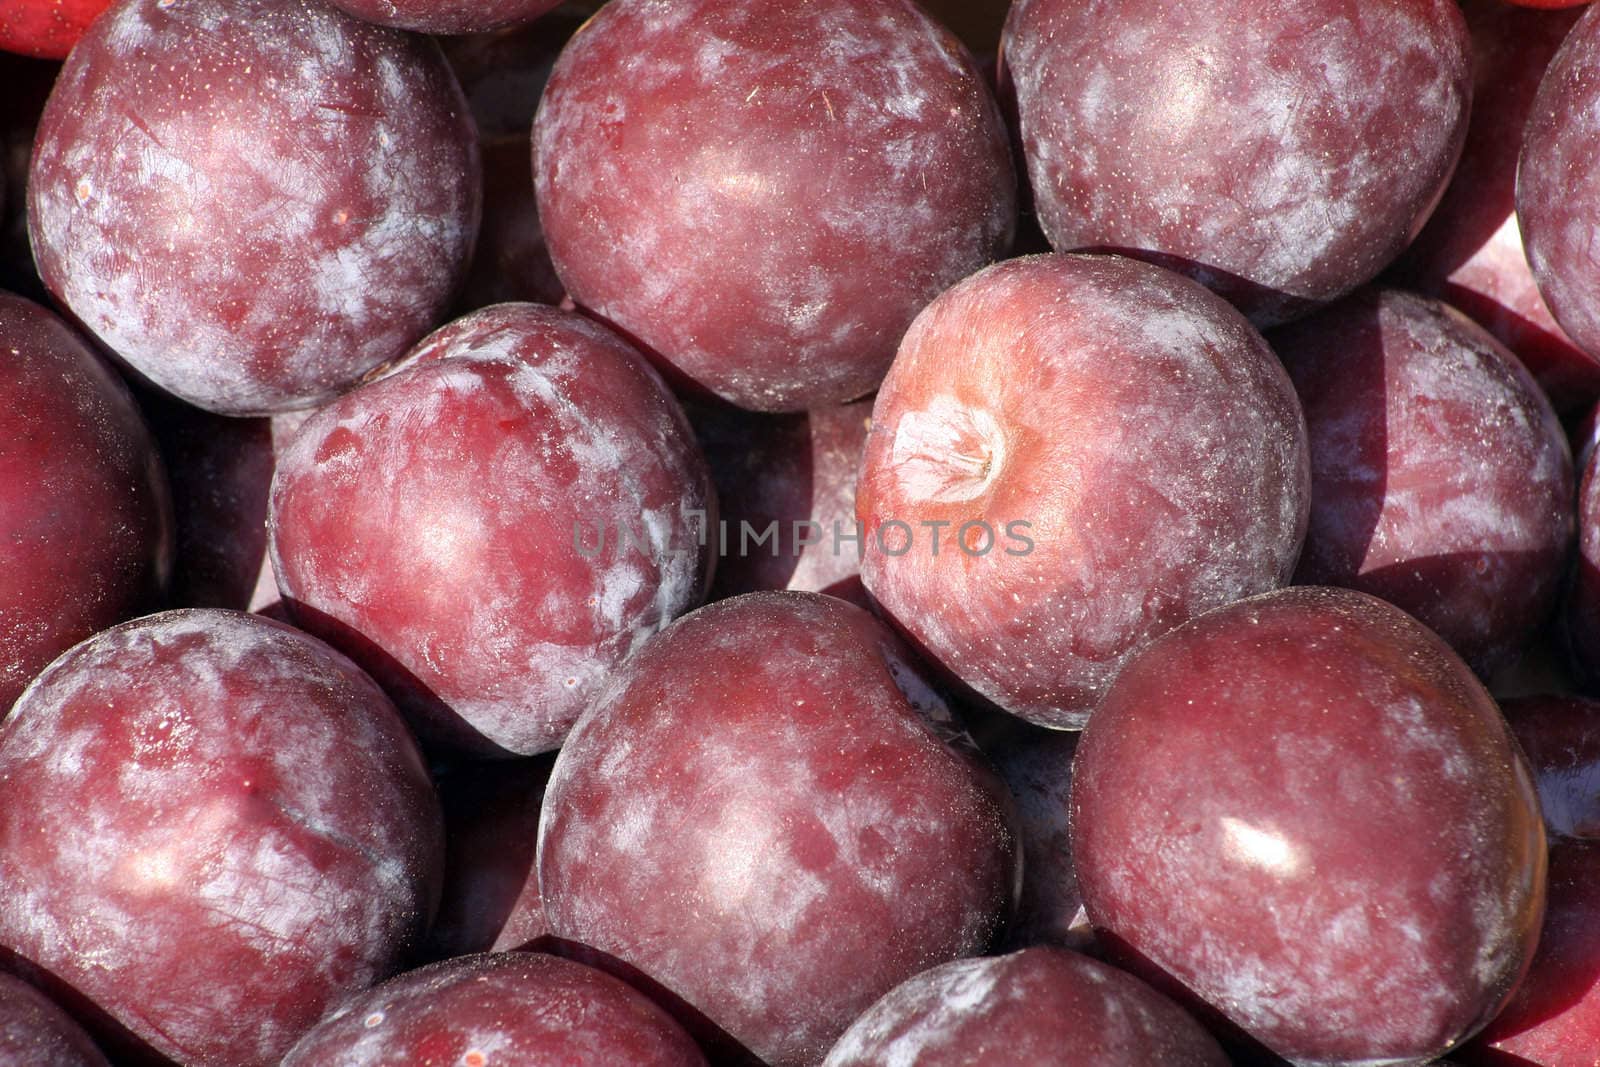 Red plums displayed on a market.